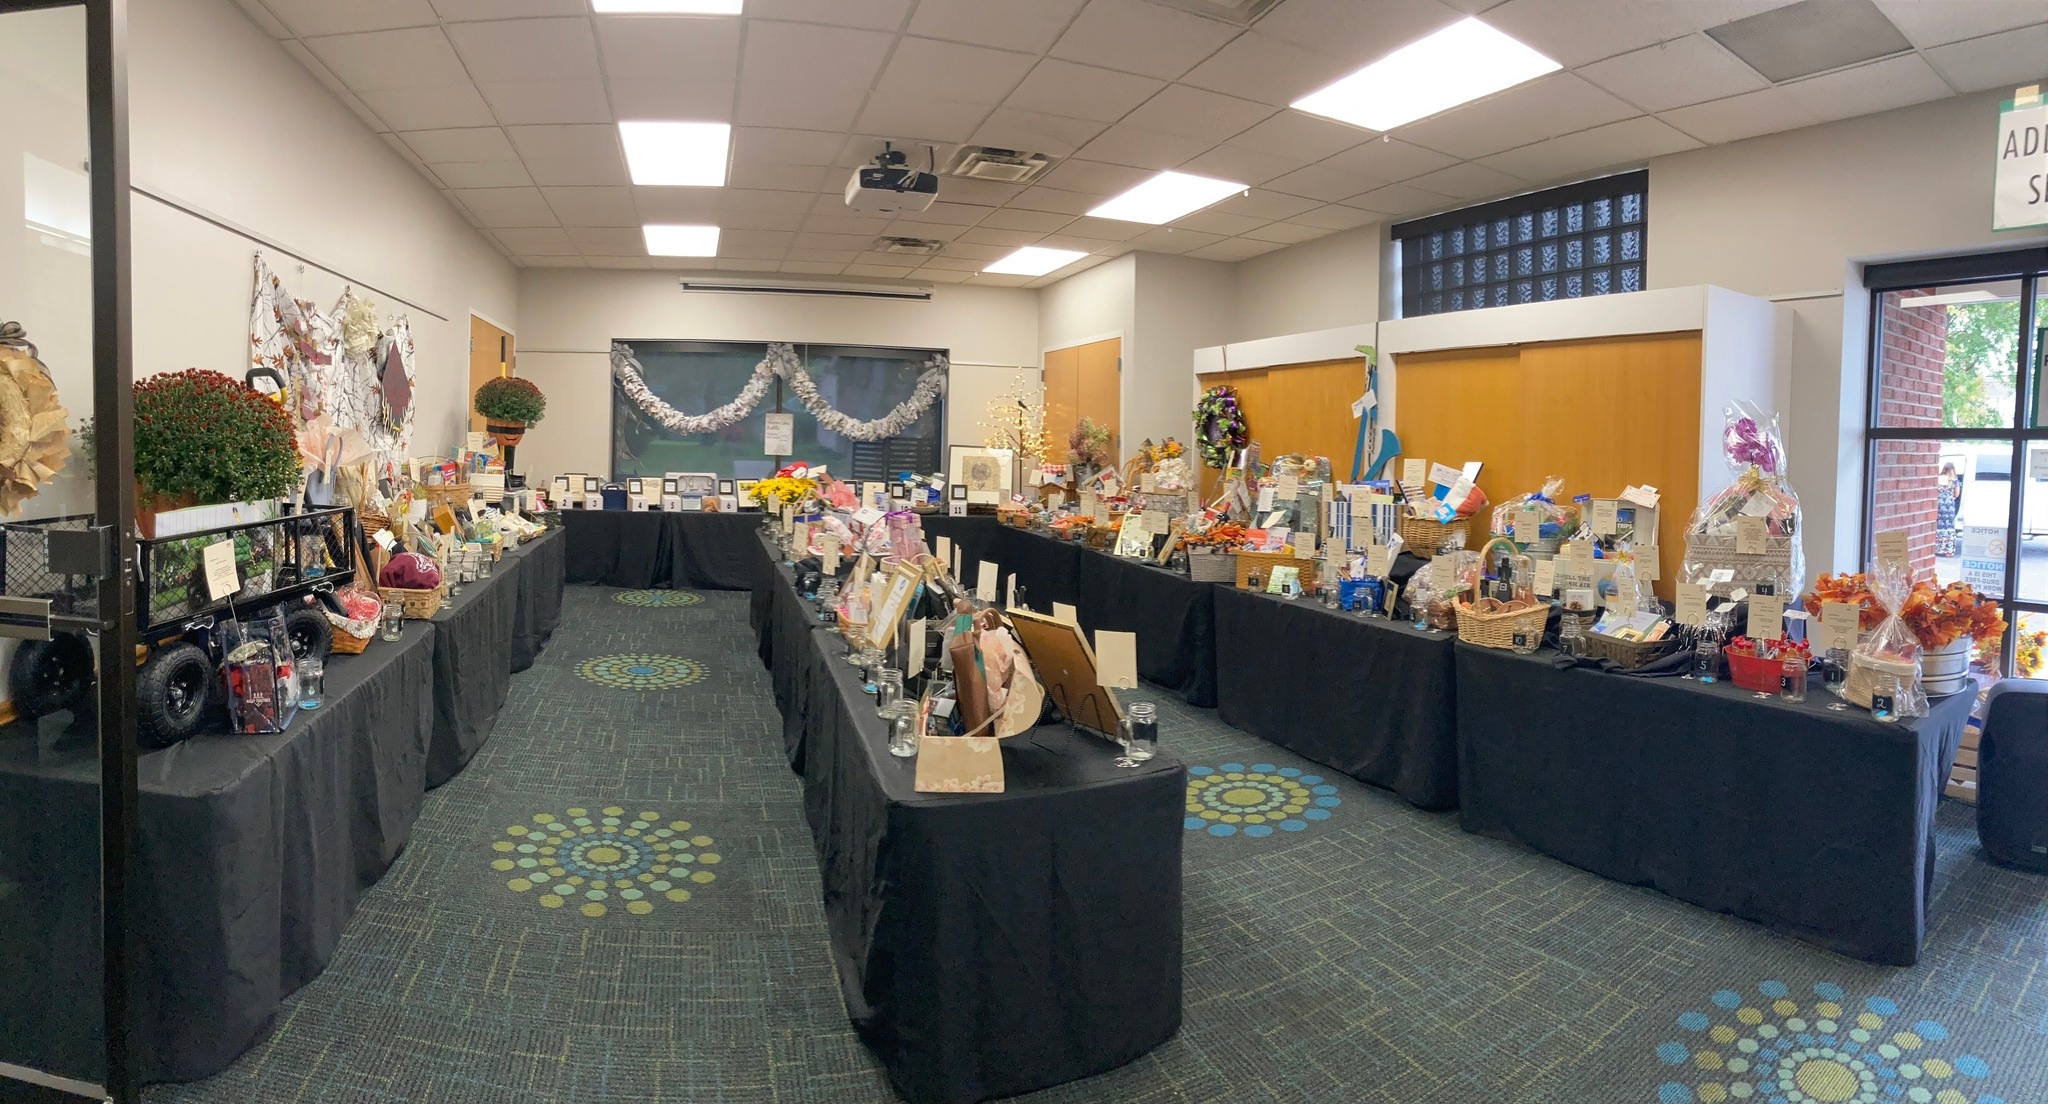 Here we see most of the 91 raffle baskets set up in the Community Room.